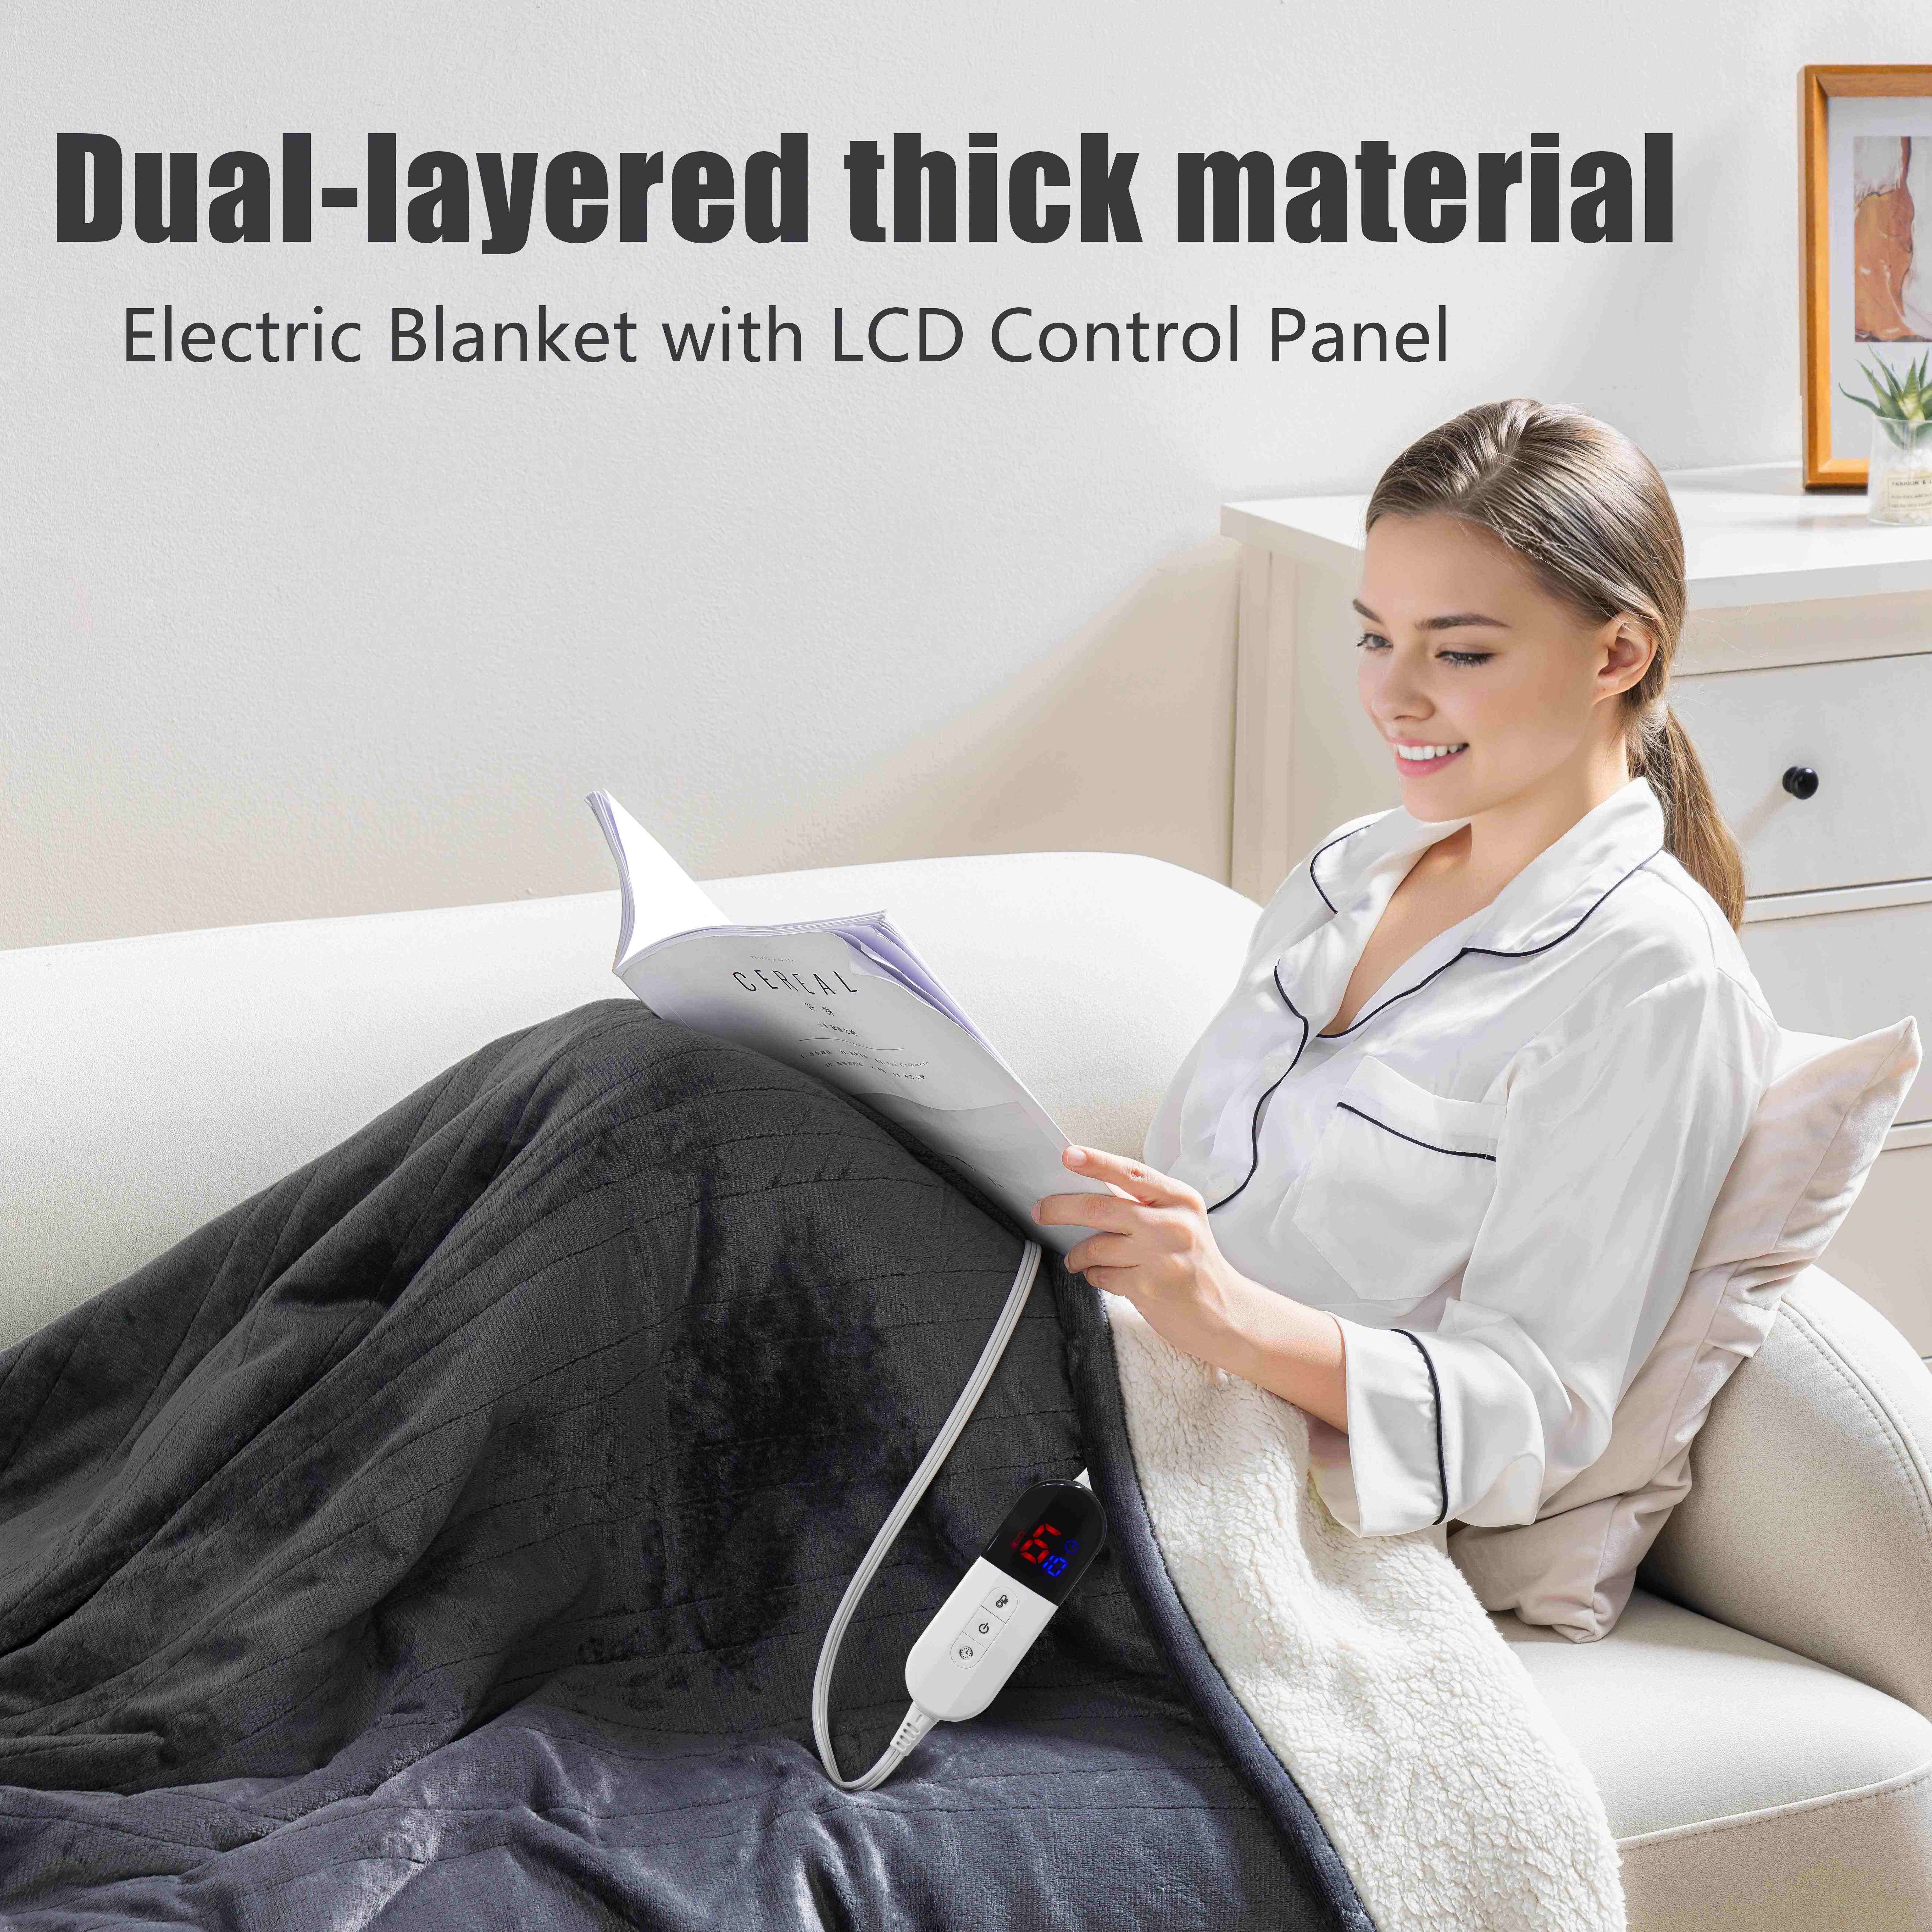 1pc electric blanket heated throw fast heating and hand controller with led control panel machine washable soft and comfortable flannel heated blanket 6 heating settings and 4or10 hours auto shut off holiday gift blanket for friend and family